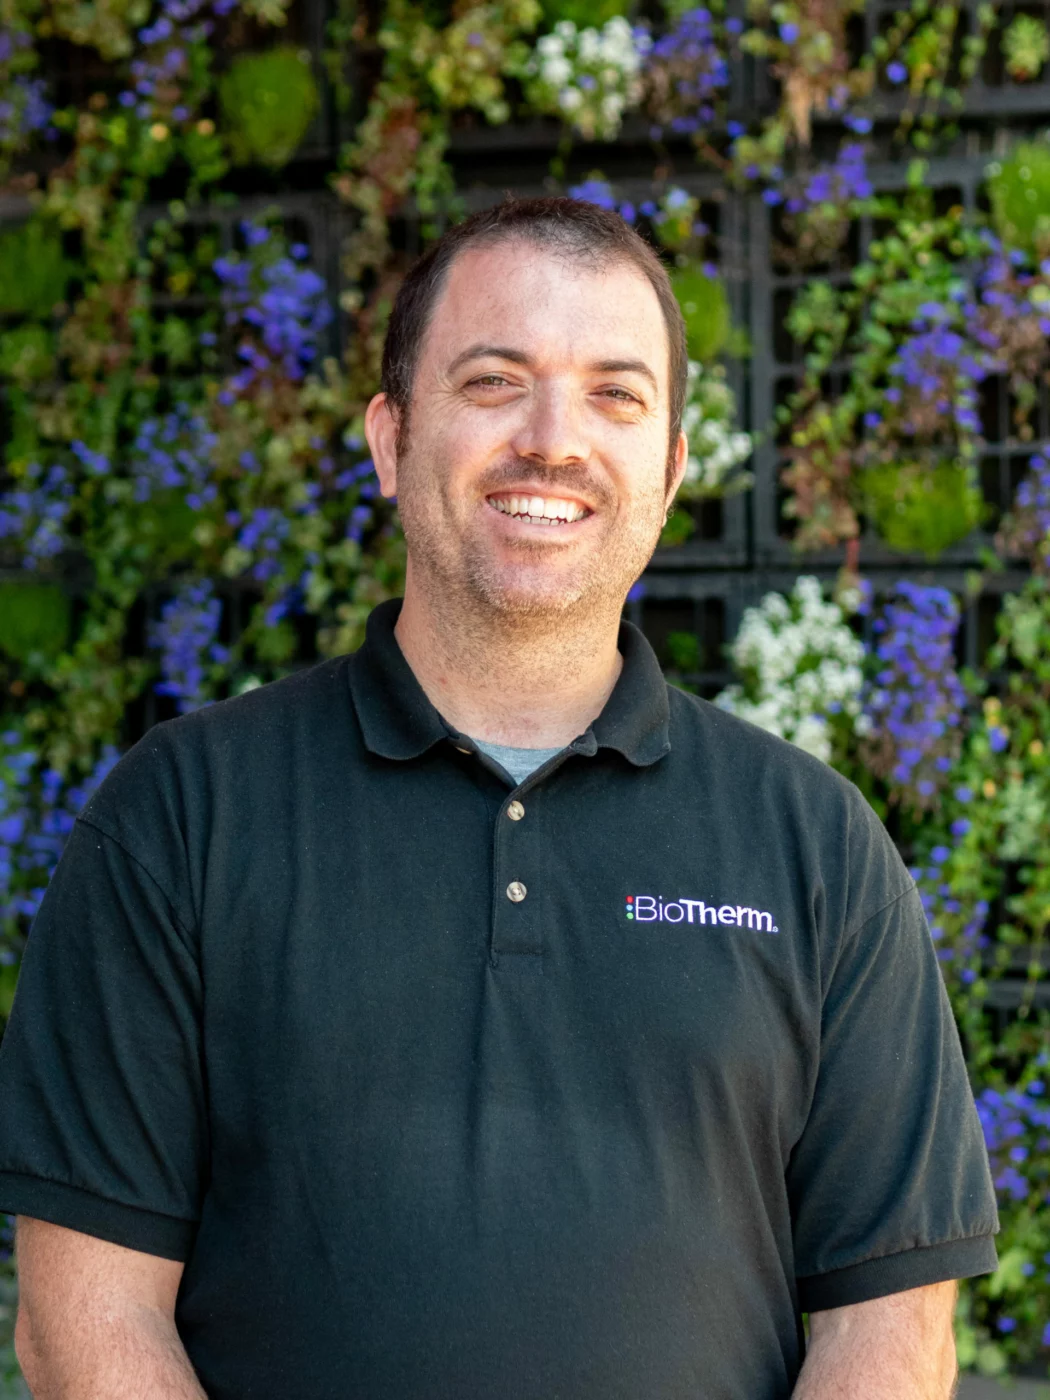 biotherm solutions staff member dan whittemore